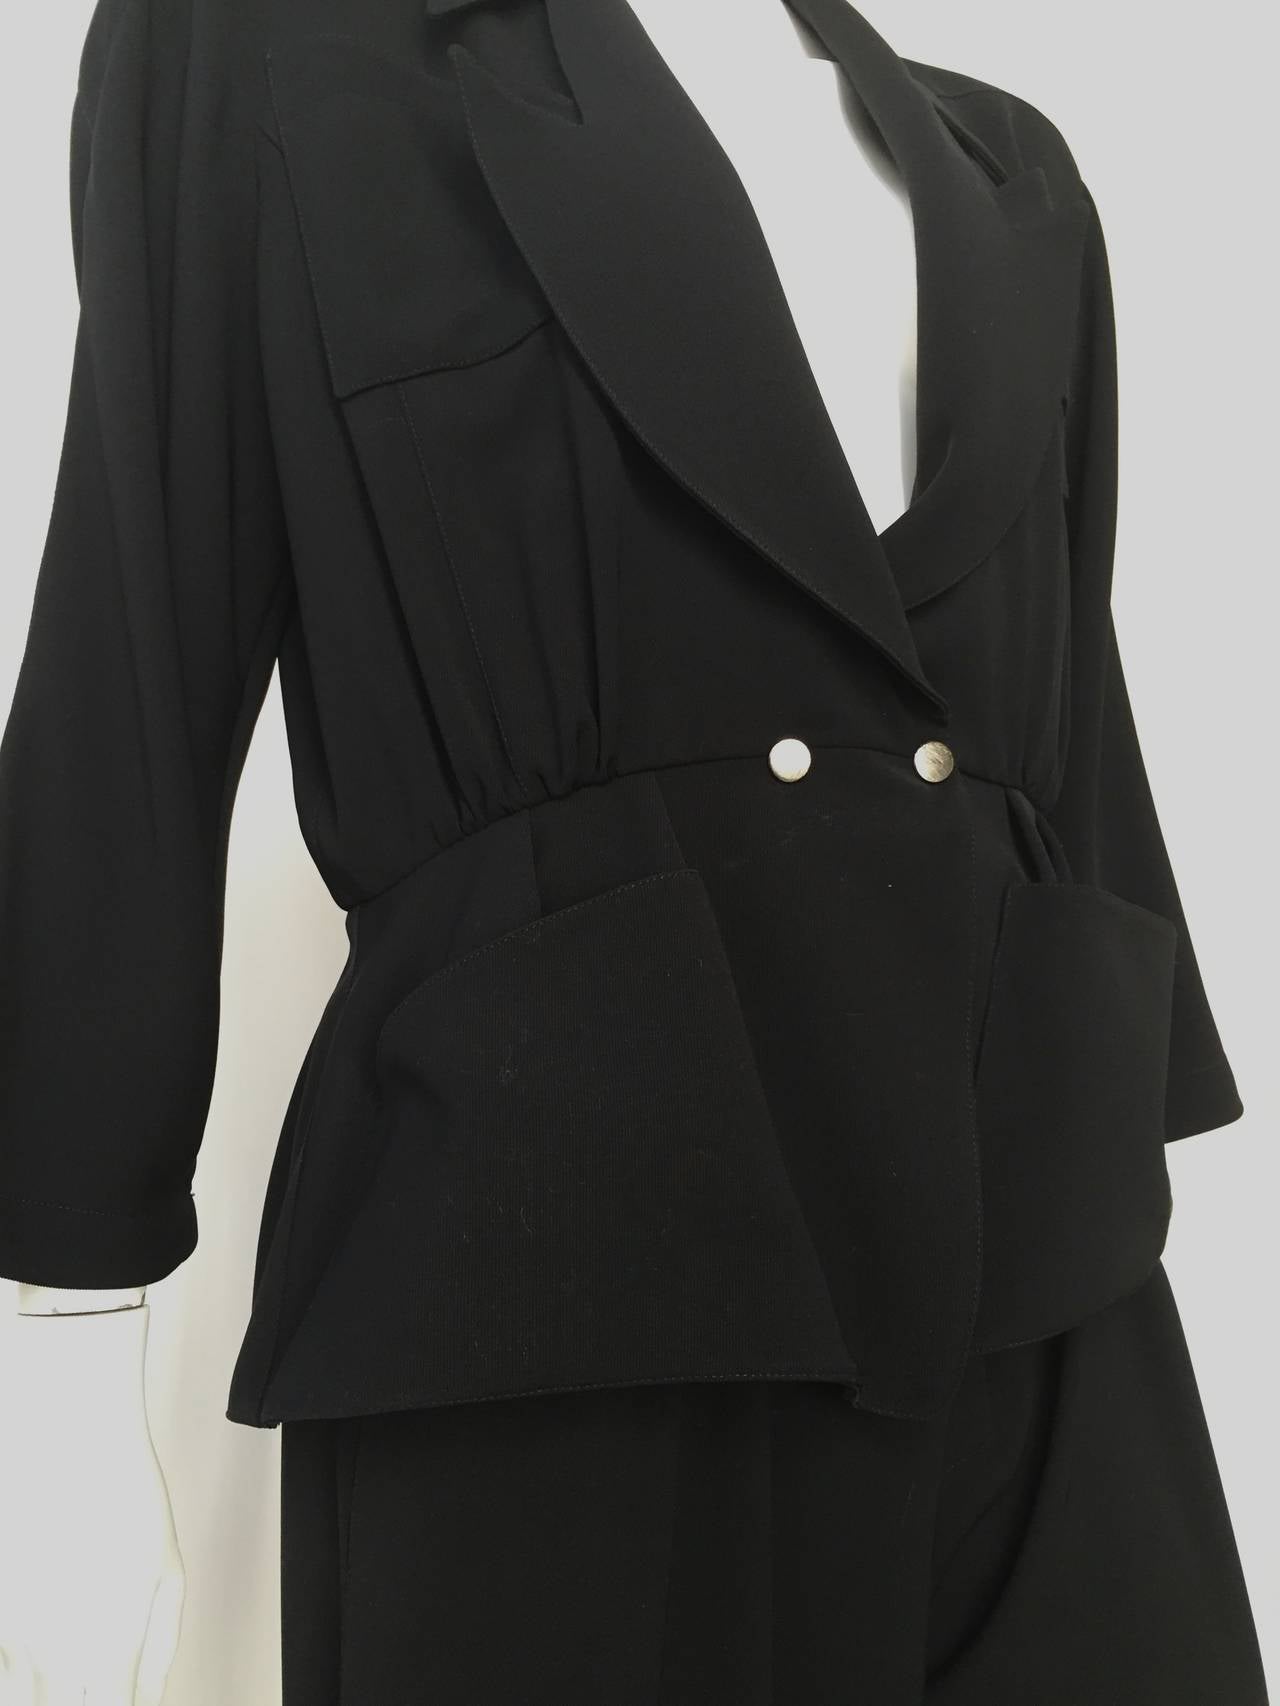 Thierry Mugler Black Pant Suit Size 8/10. In Good Condition For Sale In Atlanta, GA